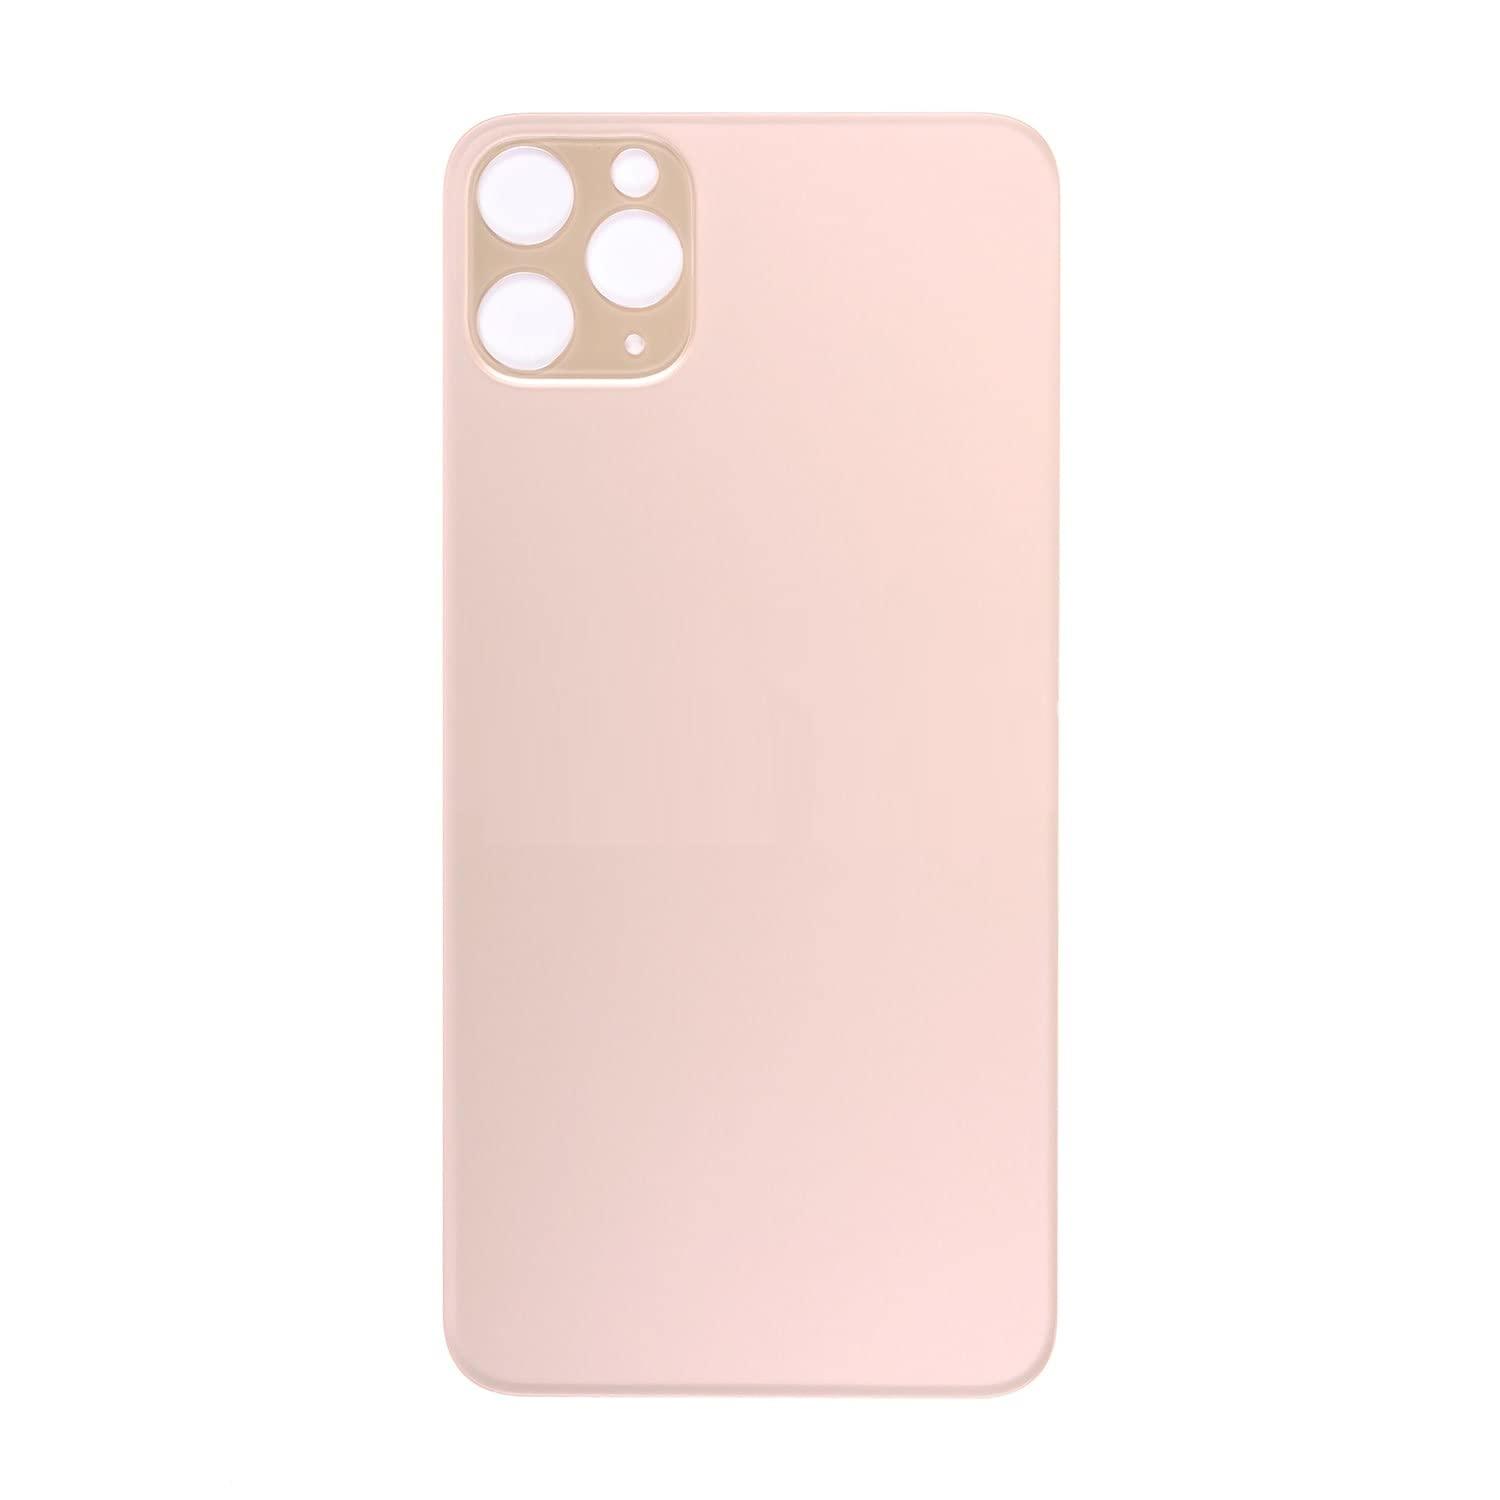 Back Glass Panel for Apple iPhone 11 pro Gold